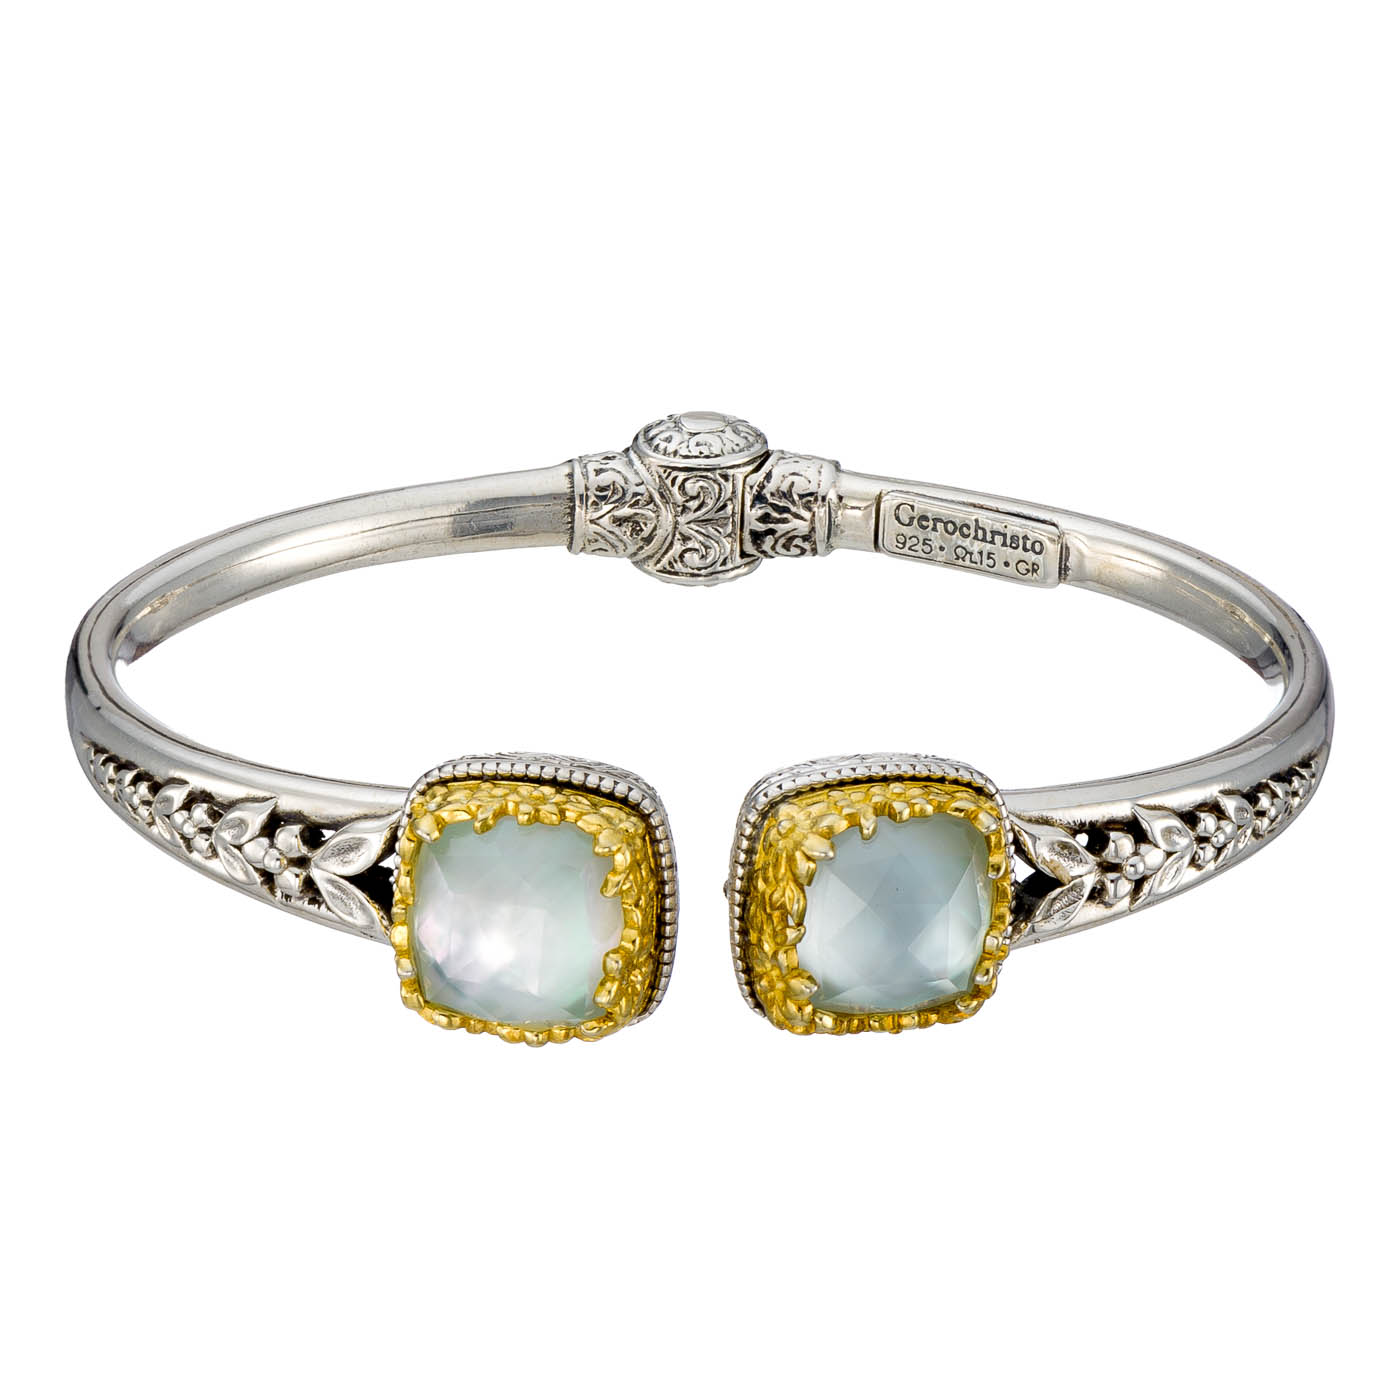 Dione Square Bracelet in Sterling Silver with Gold Plated parts and Doublet Stone